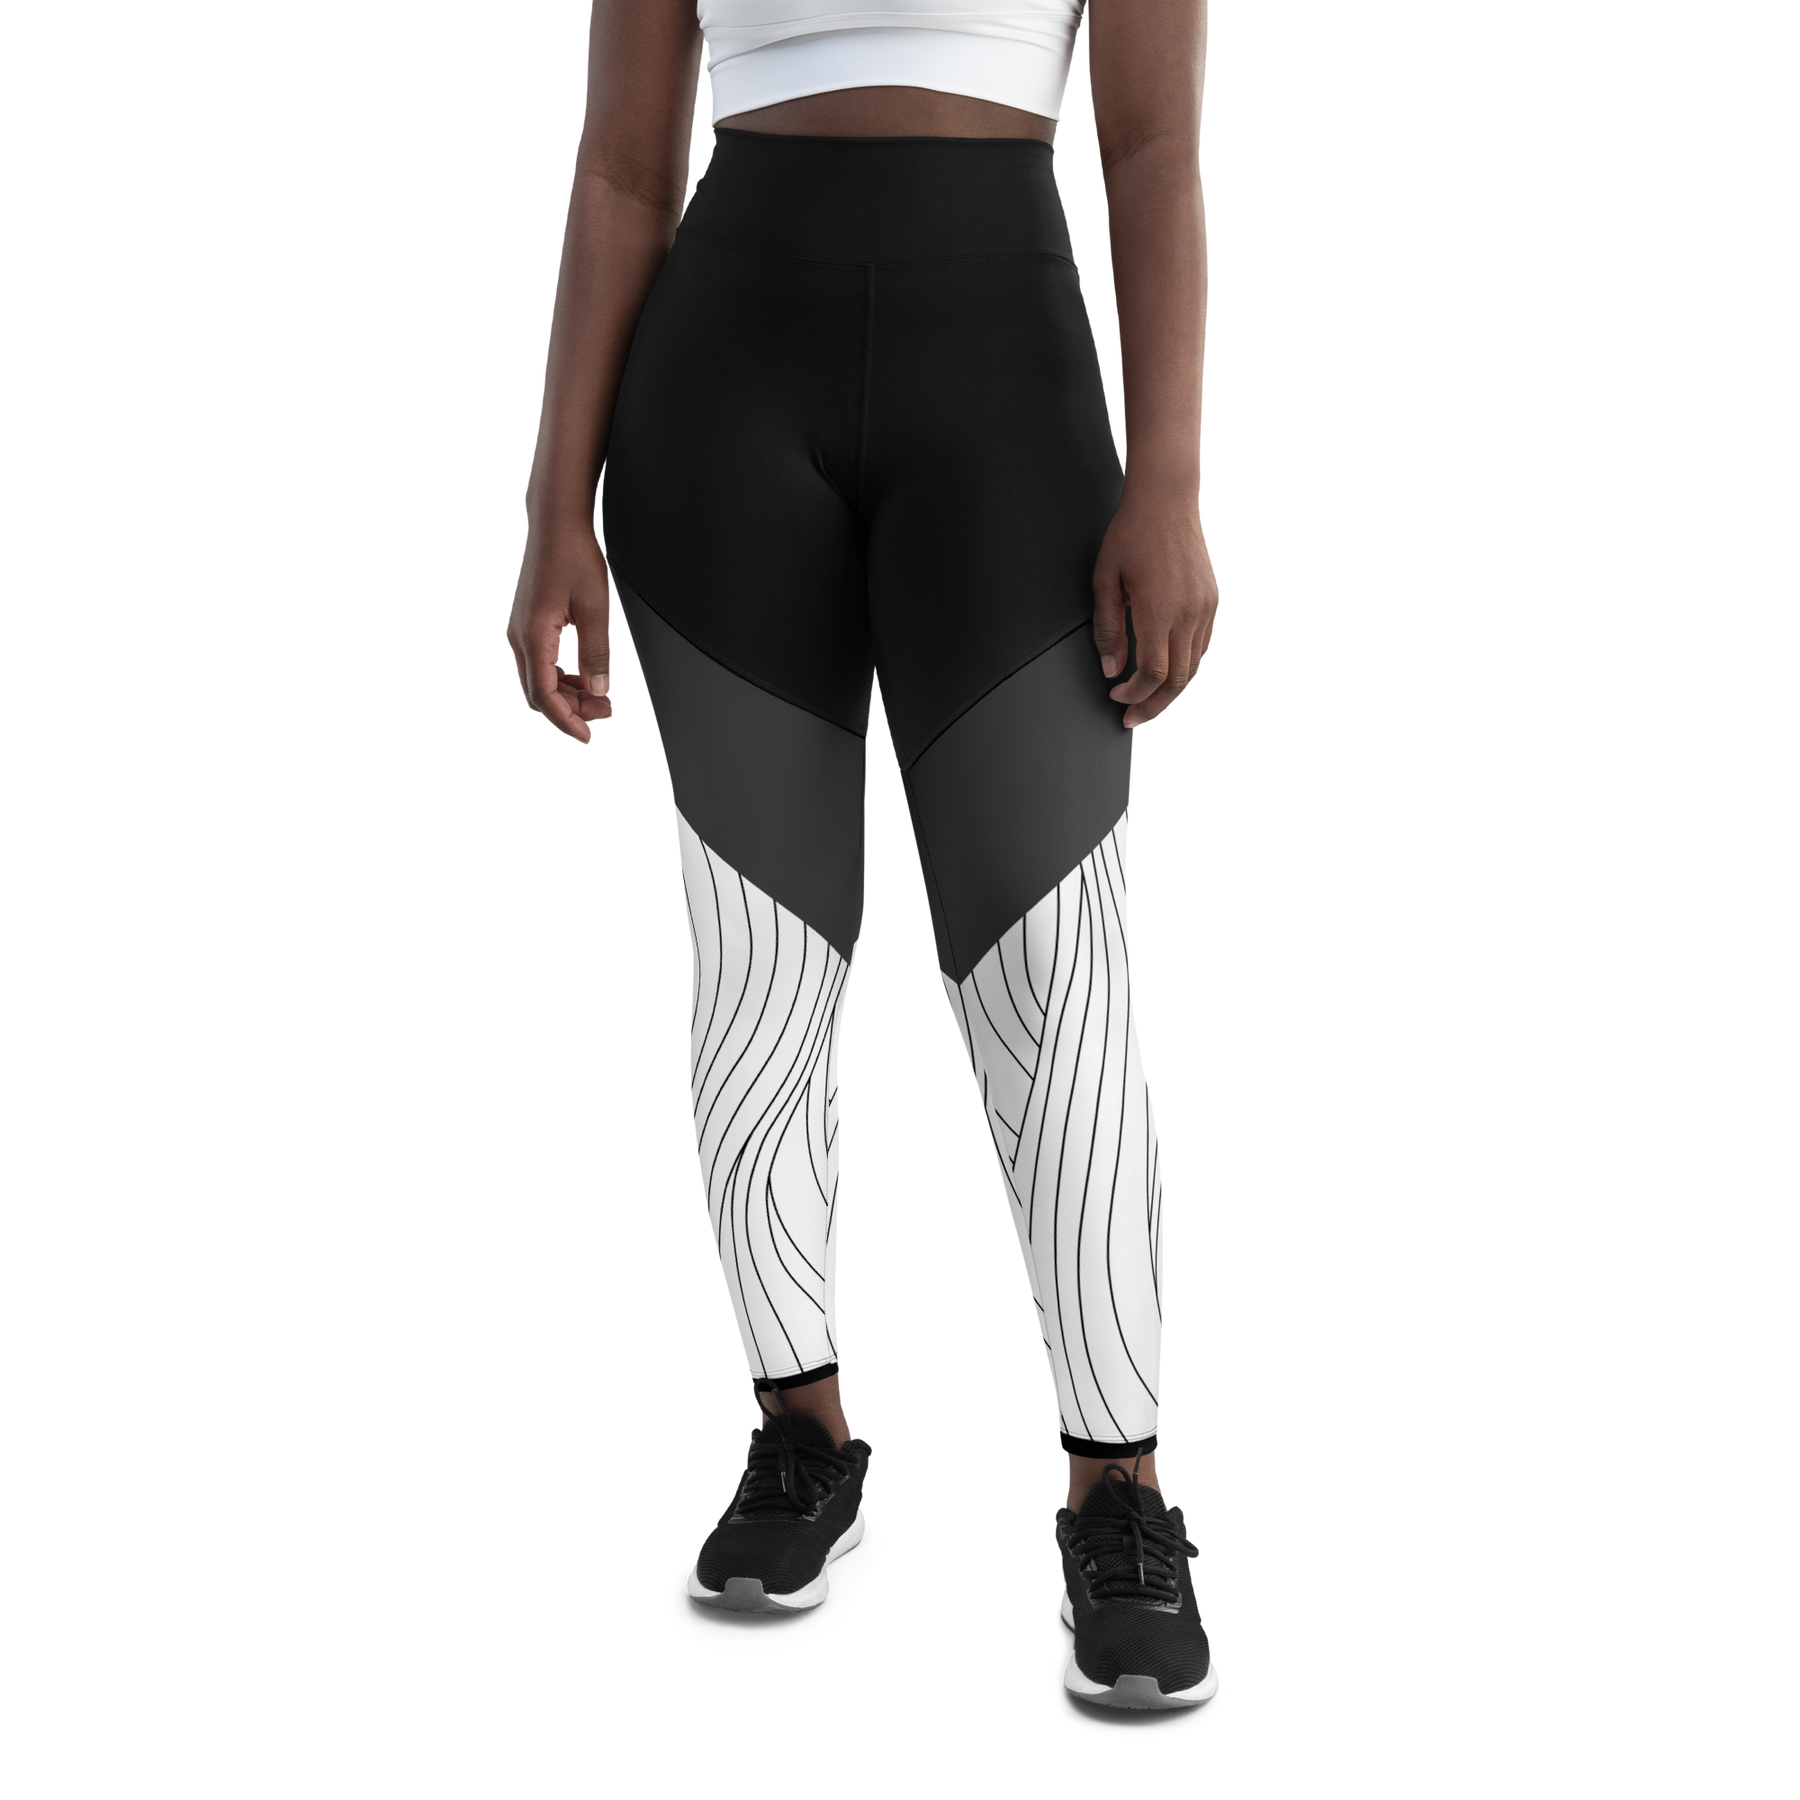 Lined Compression Leggings